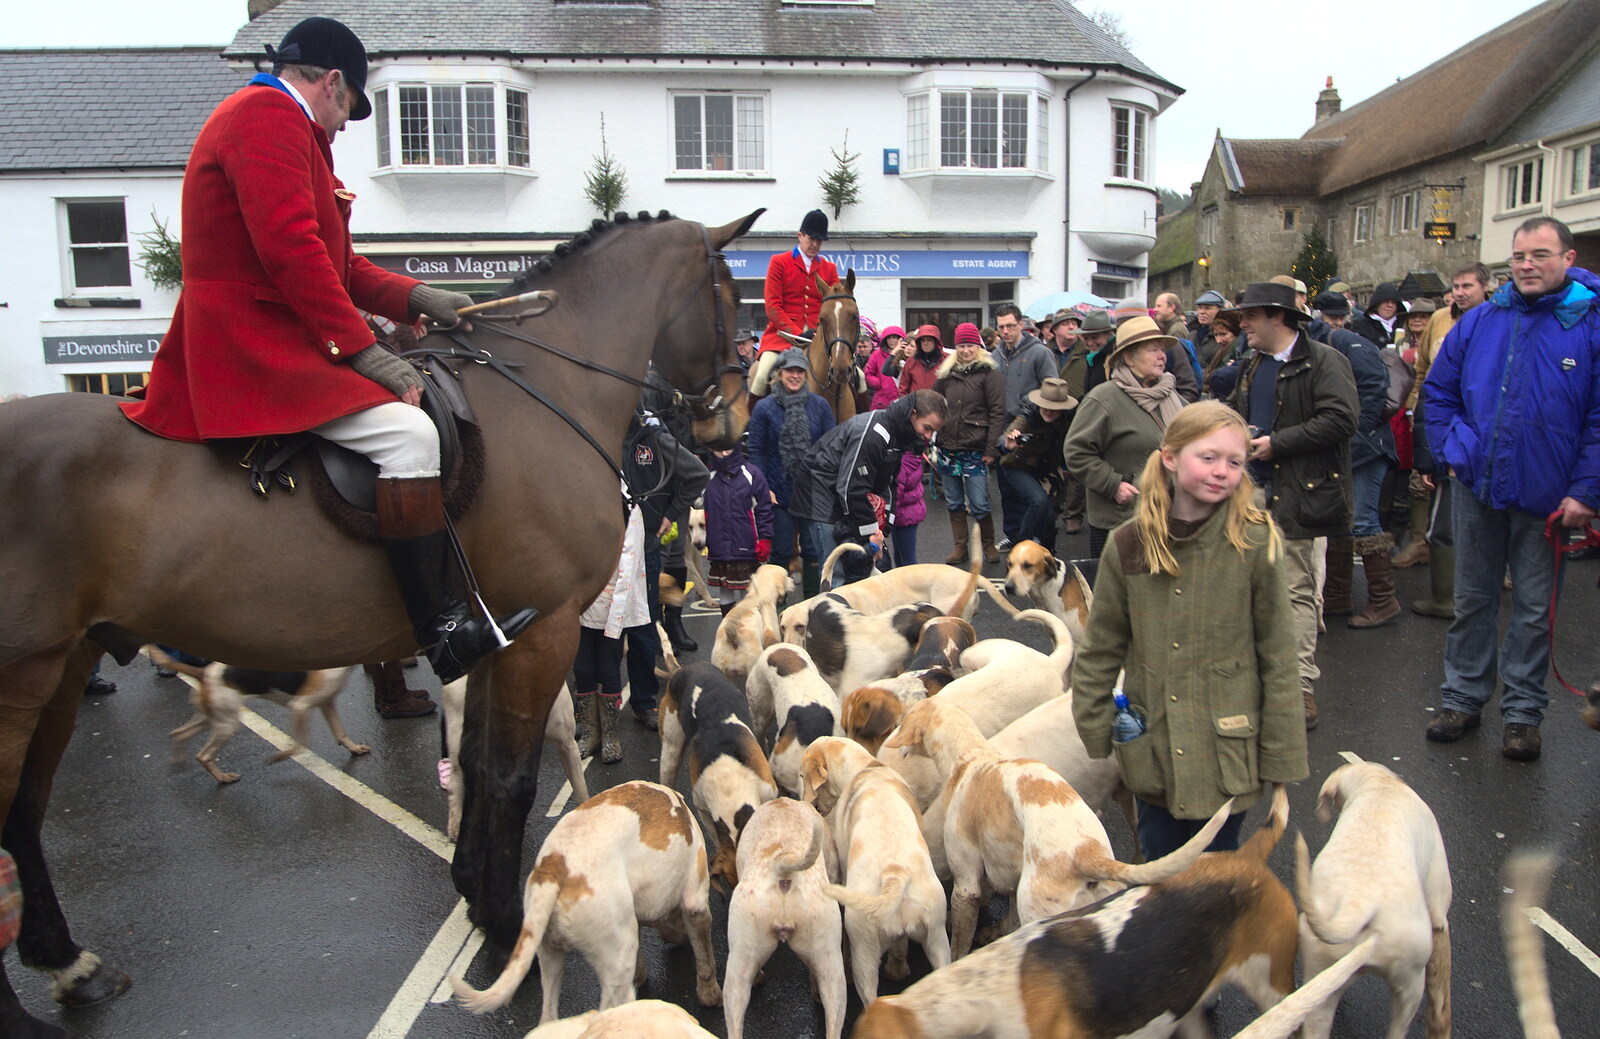 The crowds build up from The Boxing Day Hunt, Chagford, Devon - 26th December 2012